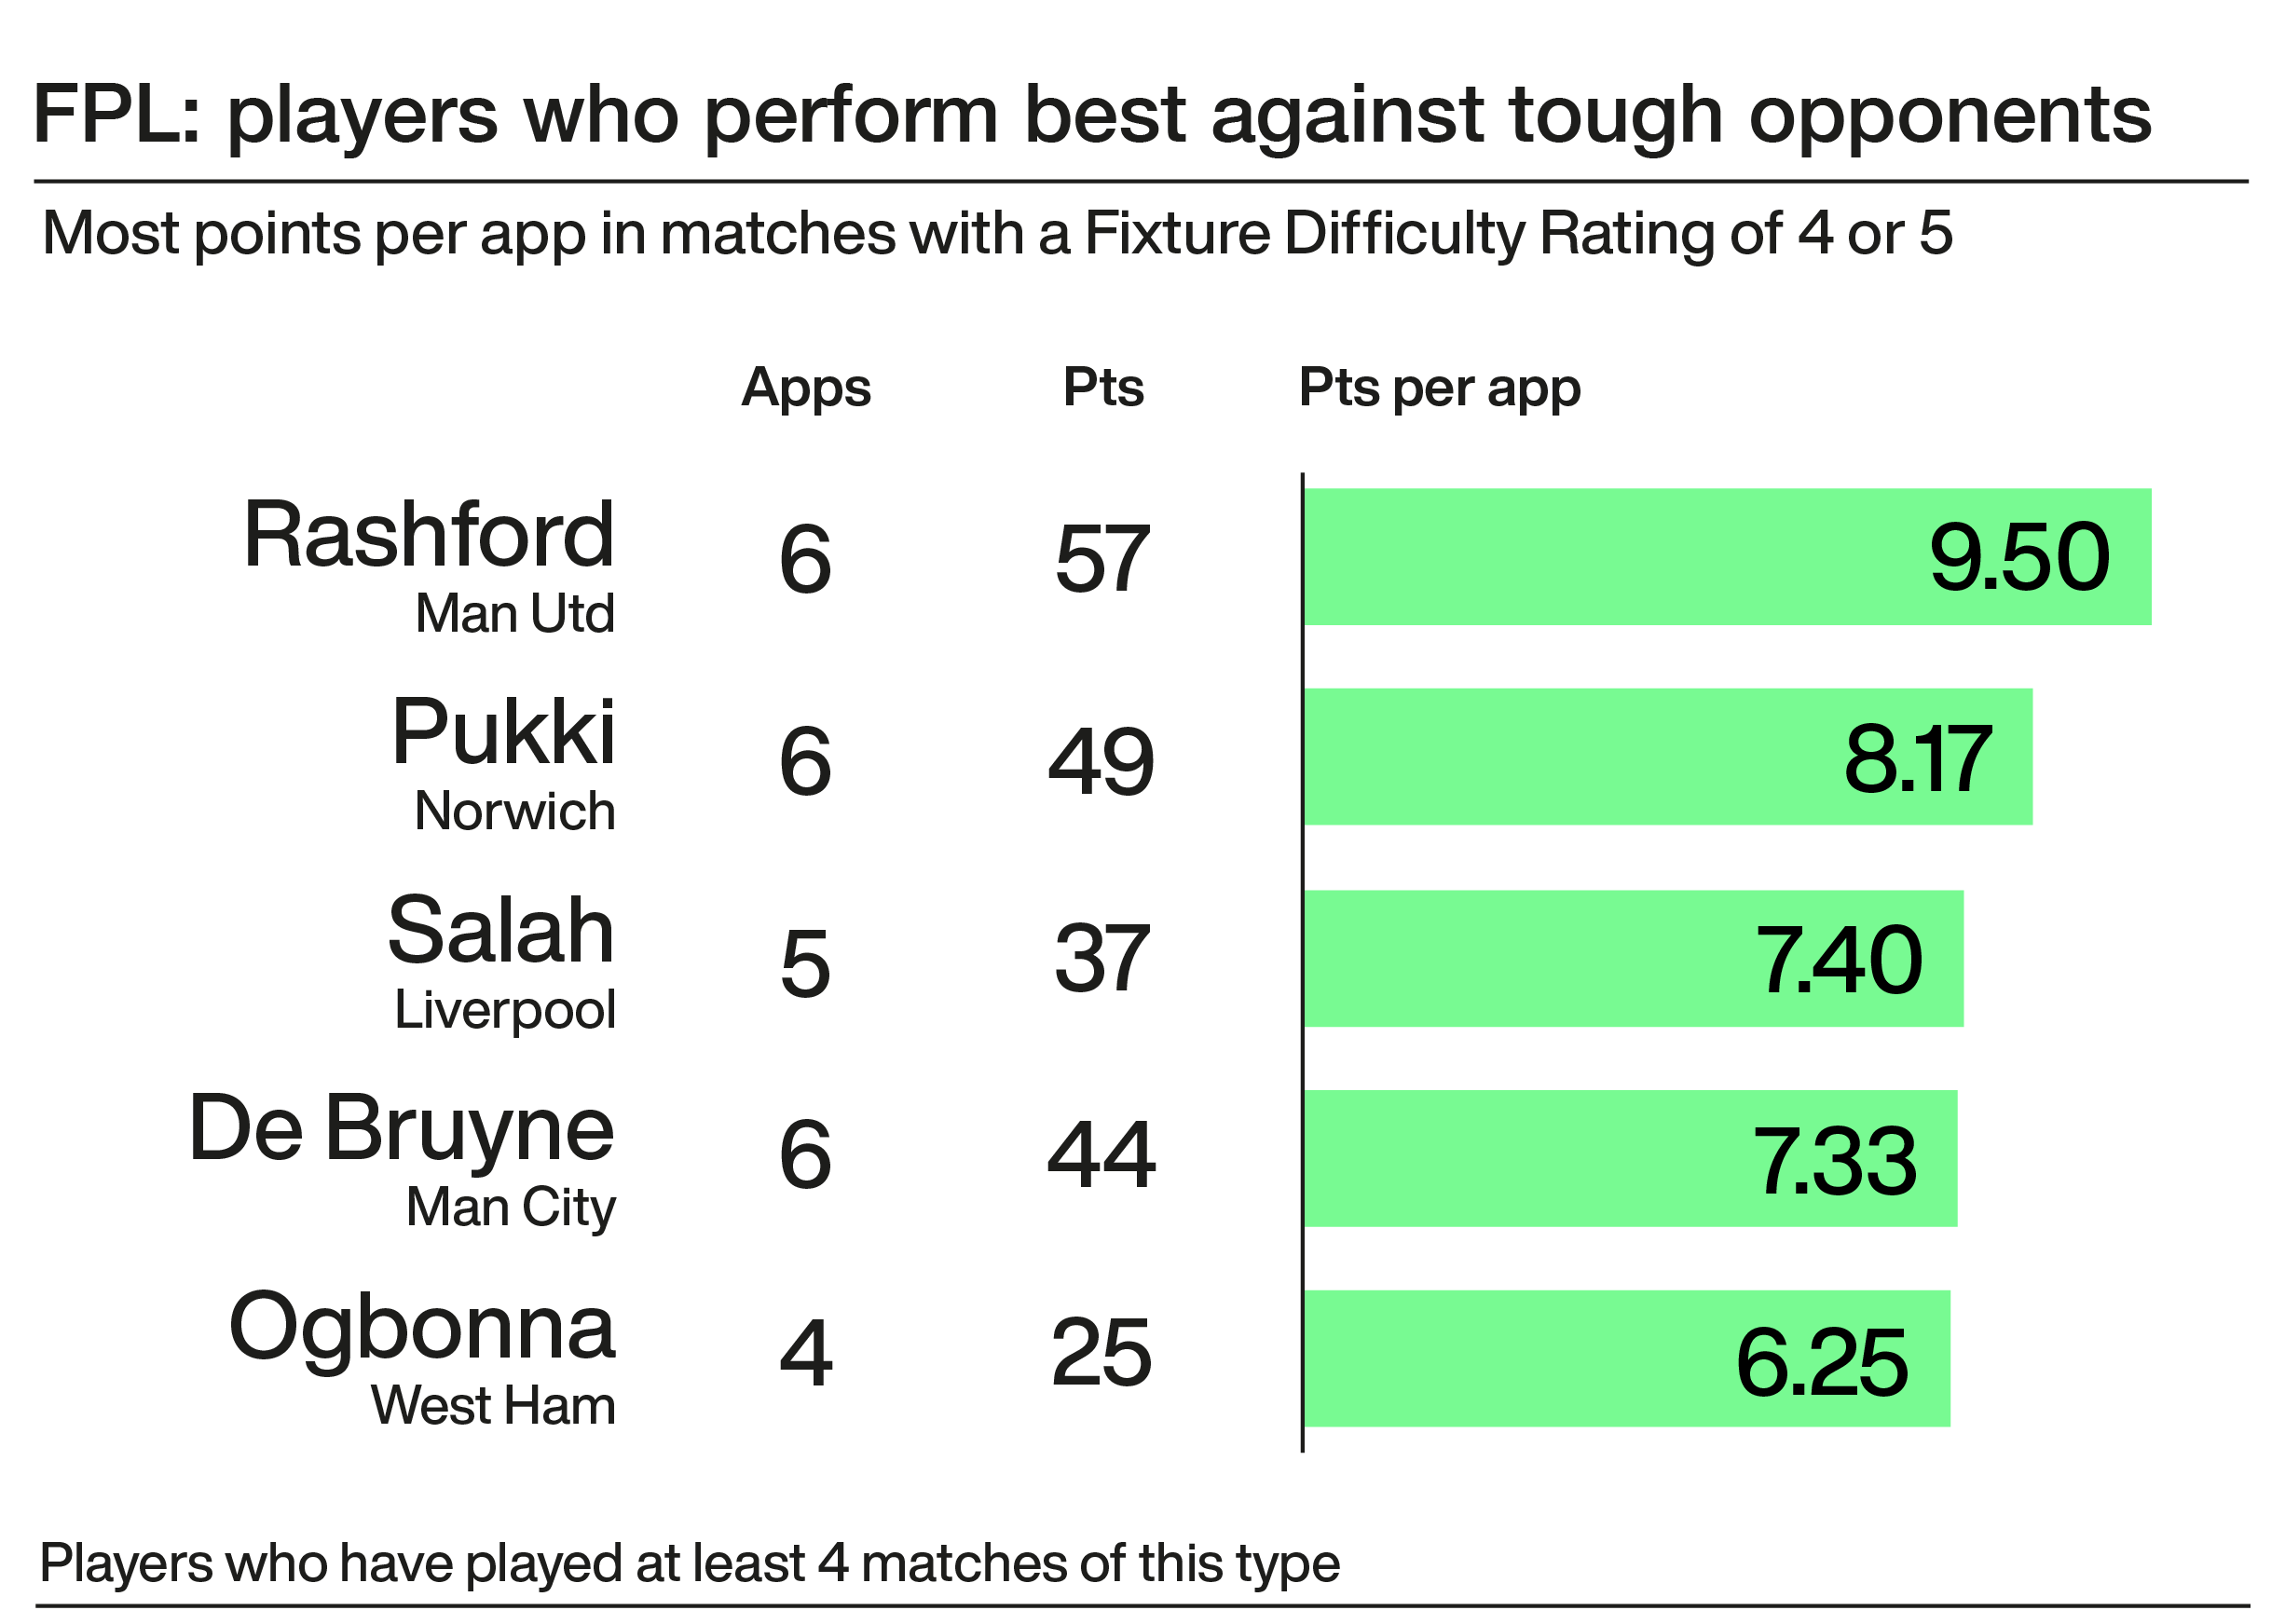 A graphic showing footballers who perform well in terms of FPL points against 'tougher' opposition